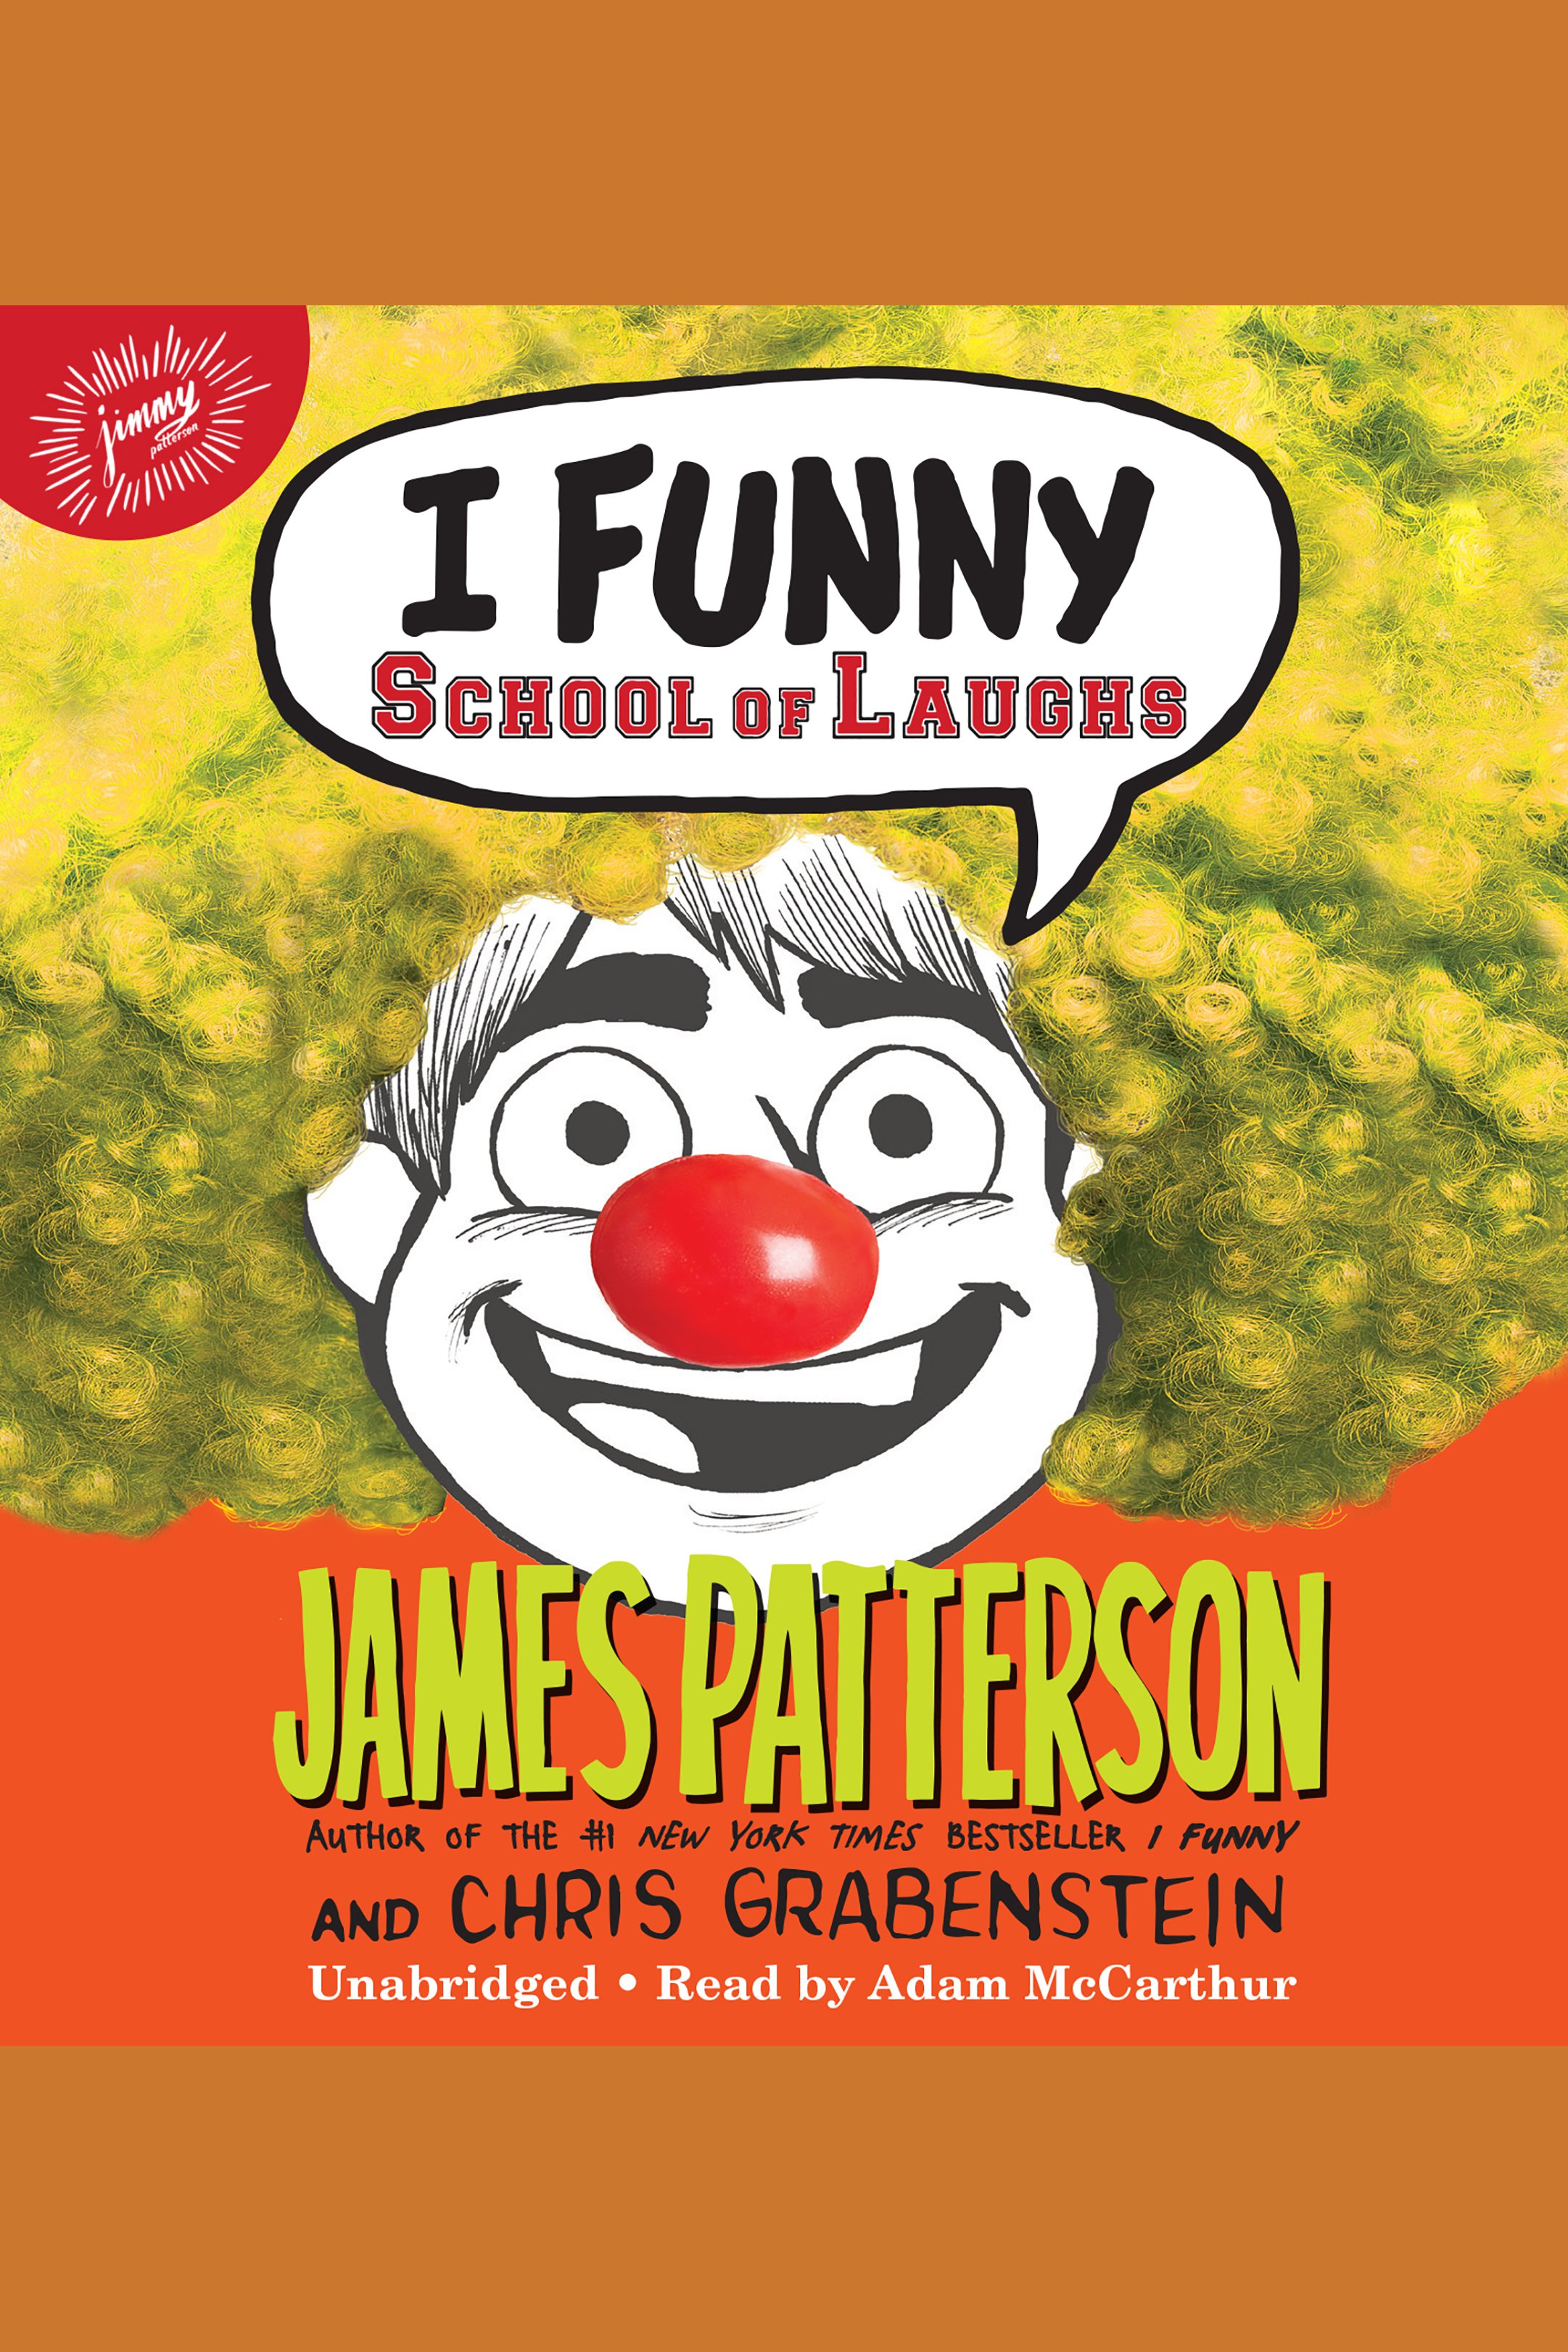 School of laughs cover image